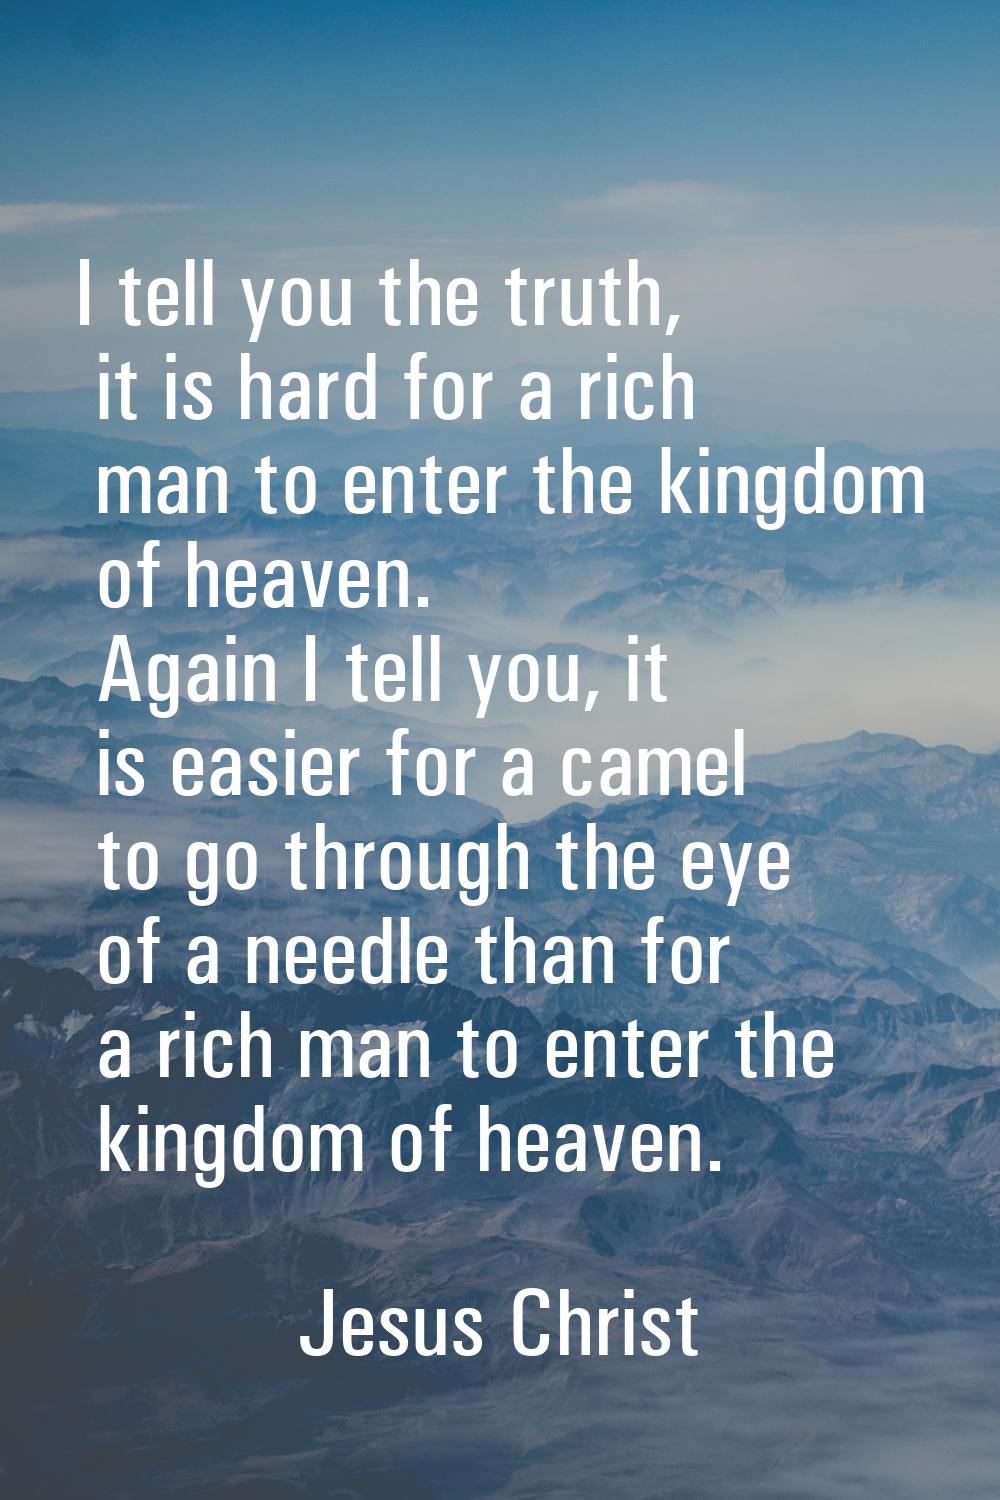 I tell you the truth, it is hard for a rich man to enter the kingdom of heaven. Again I tell you, i